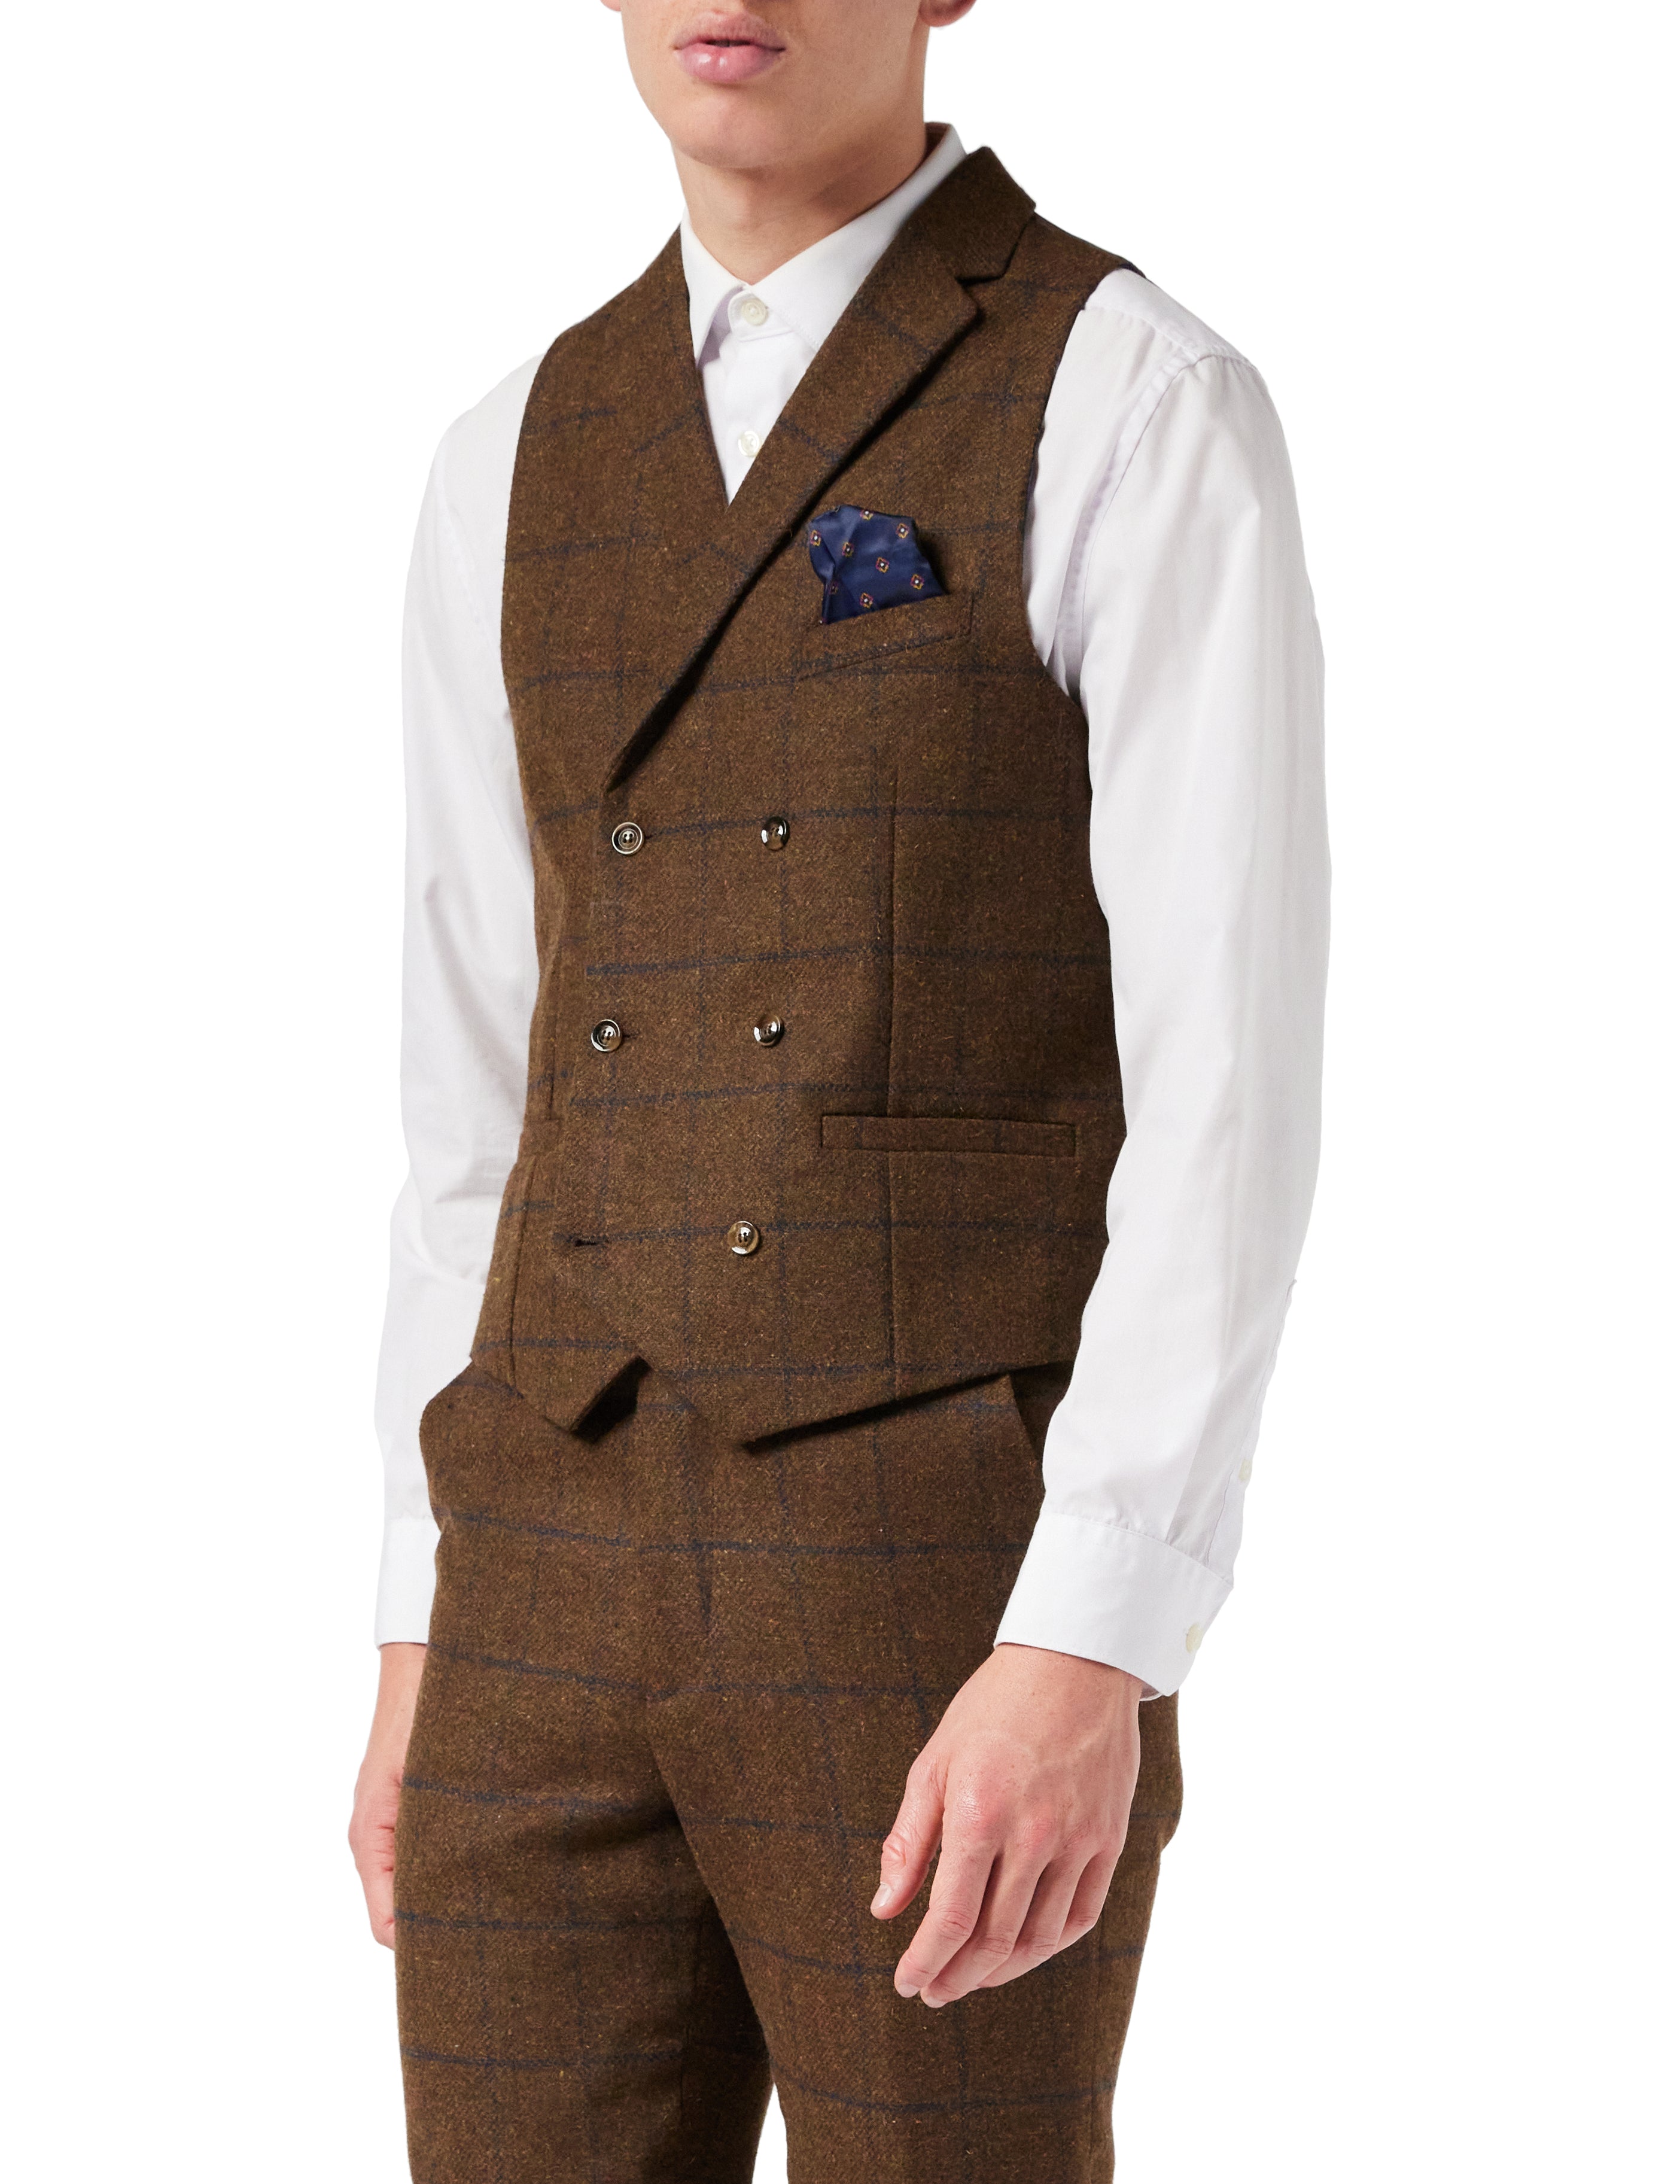 What Are The Different Kinds Of Waistcoats?